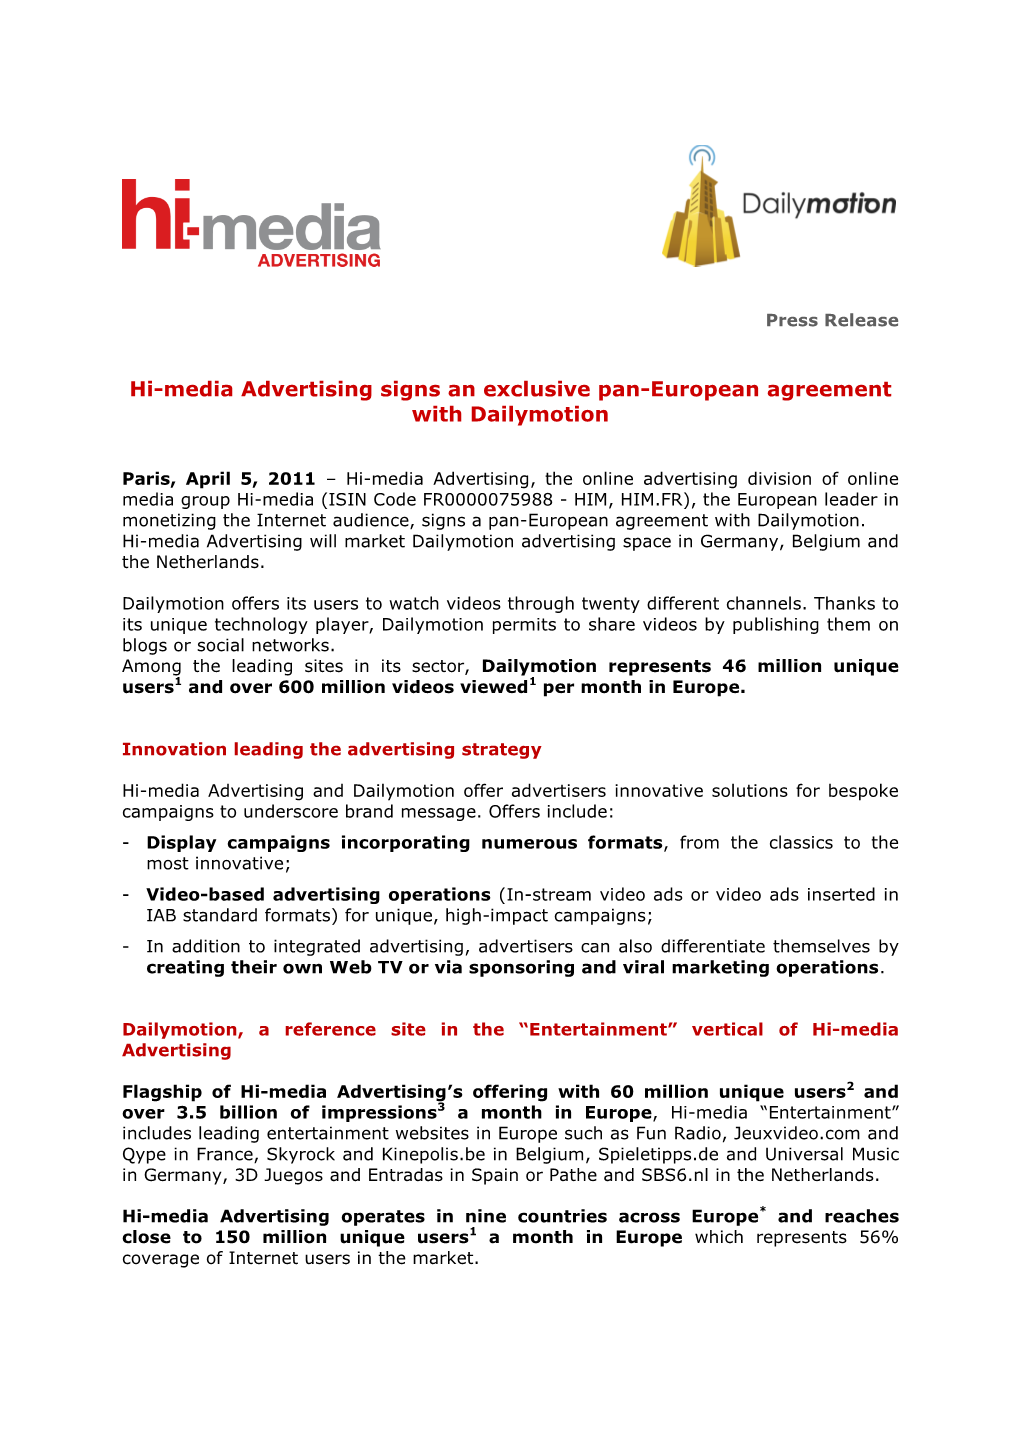 Hi-Media Advertising Signs an Exclusive Pan-European Agreement with Dailymotion